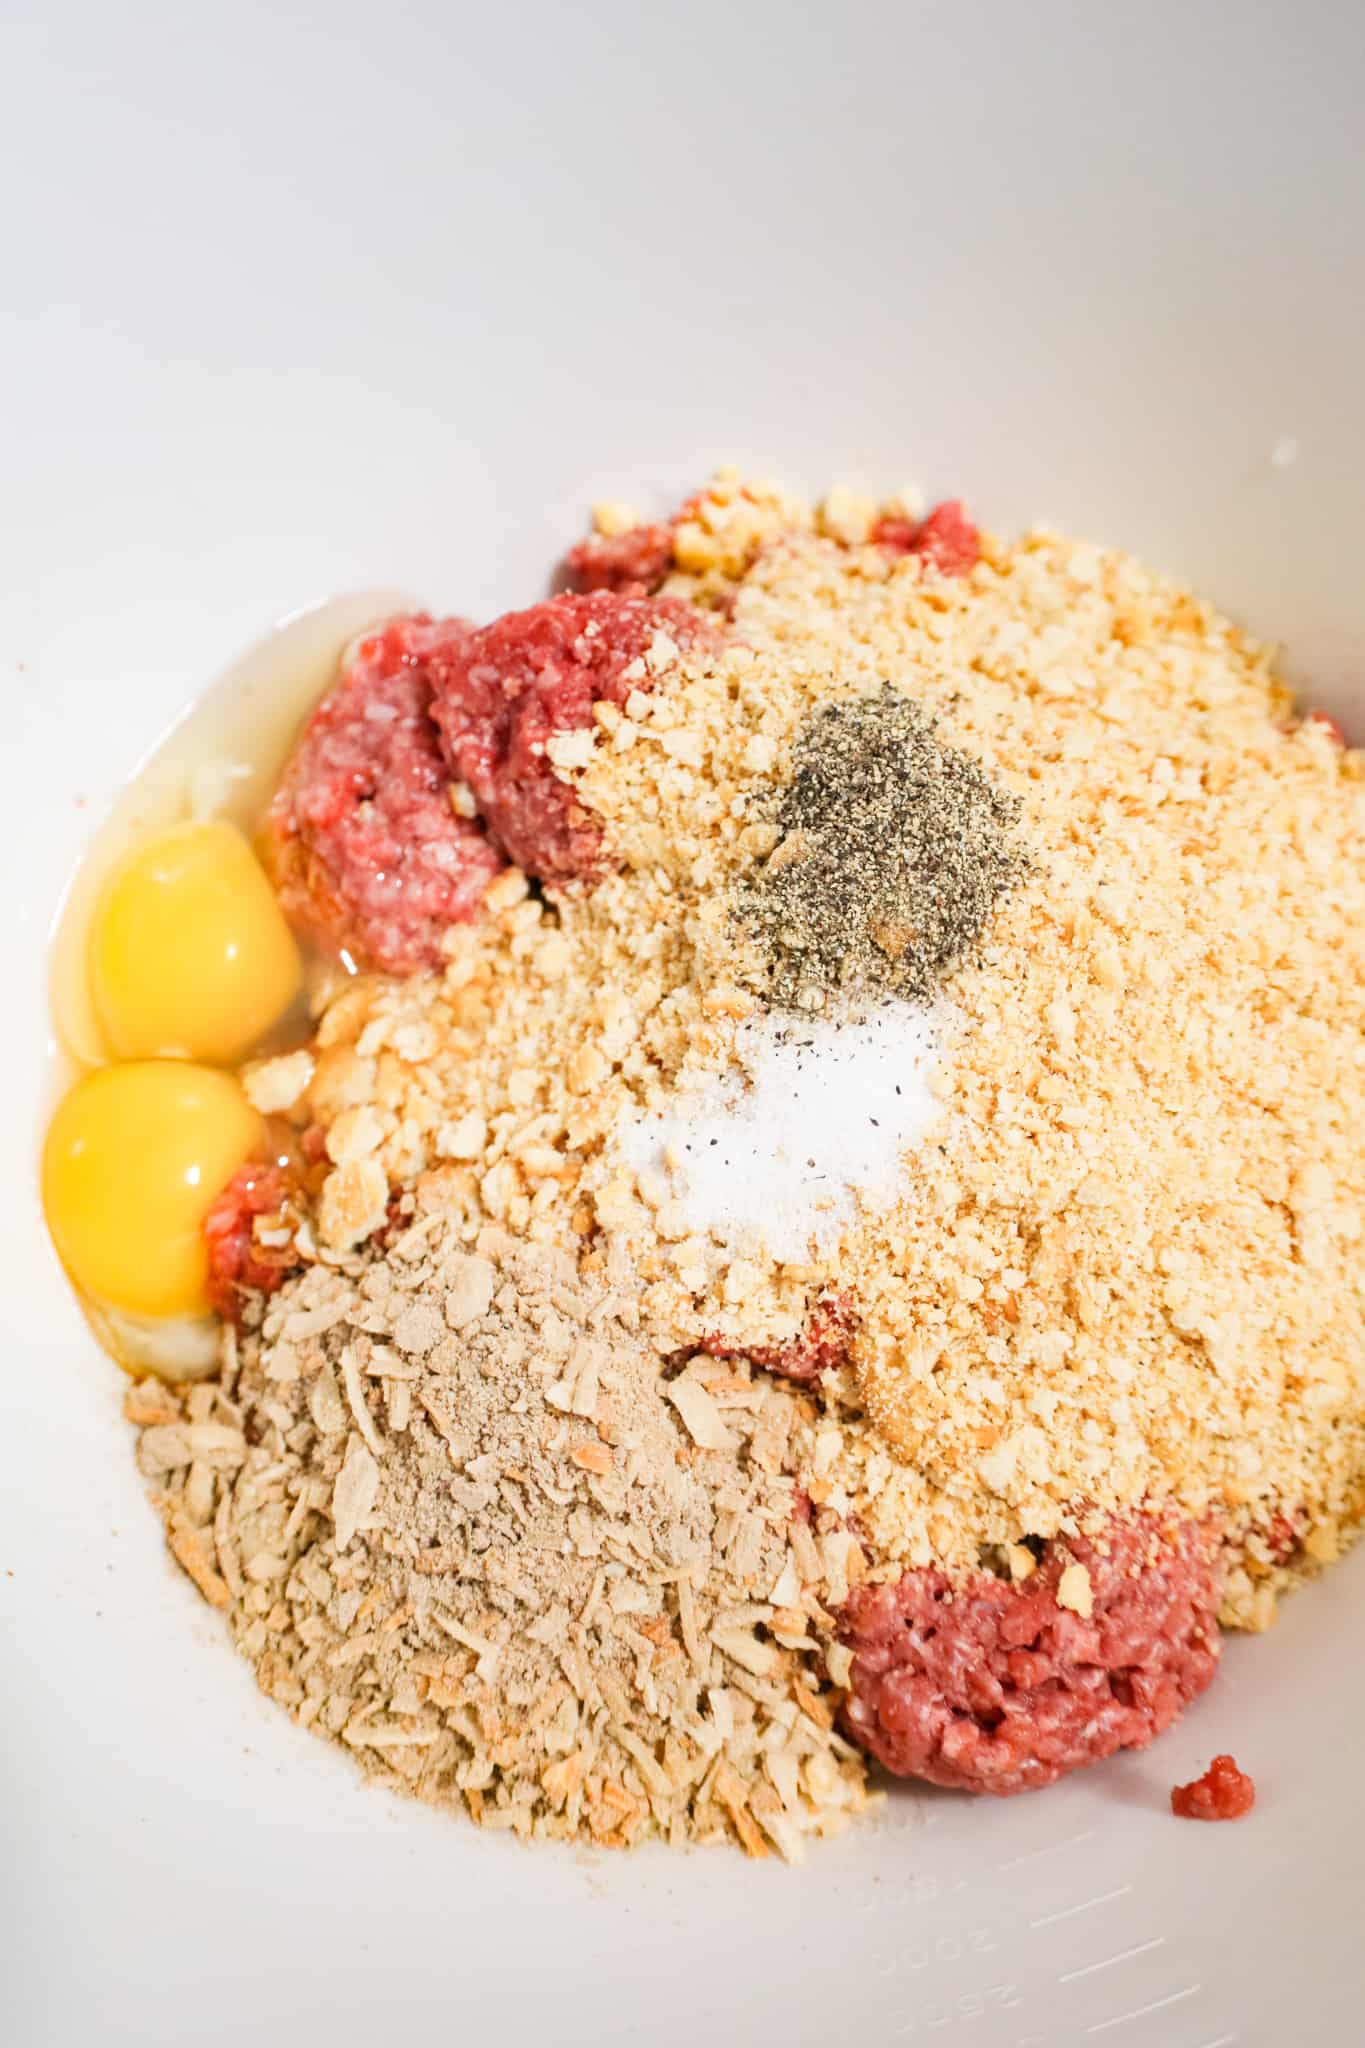 eggs, Lipton onion soup mix, crushed Ritz crackers and spices on top of raw ground beef in a mixing bowl